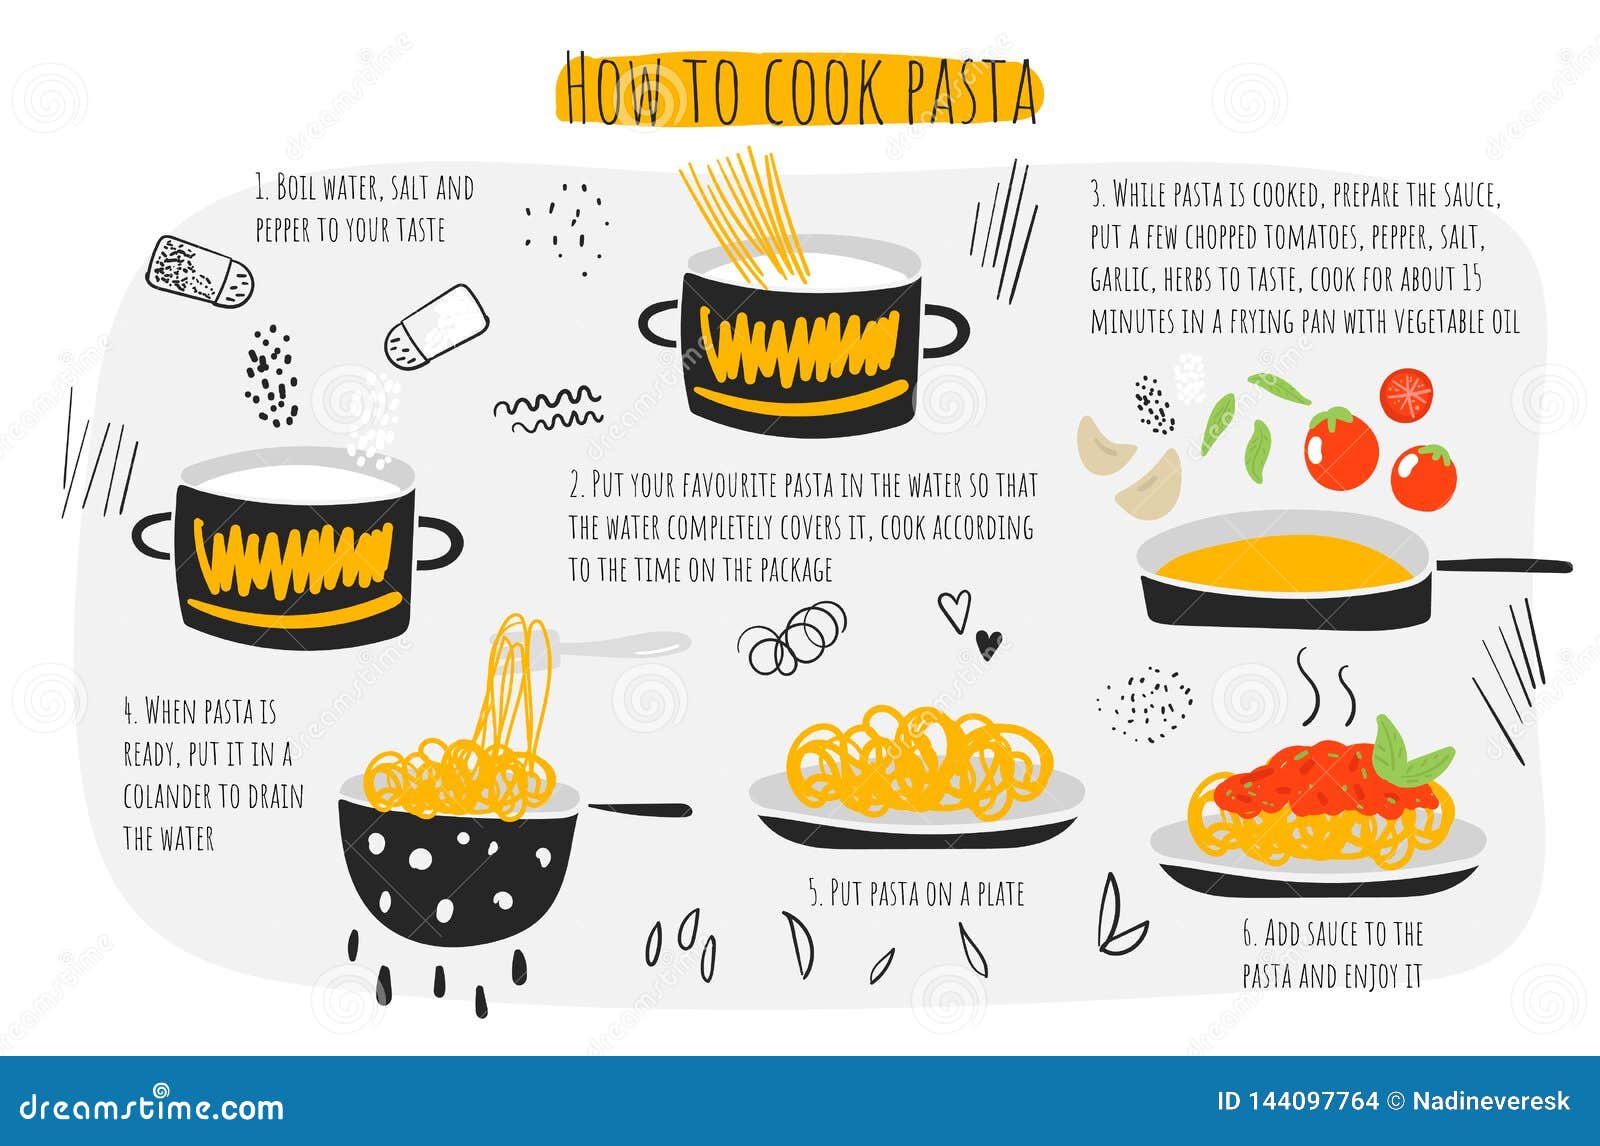 How To Cook Pasta Guide, Instructions, Steps, Infographic